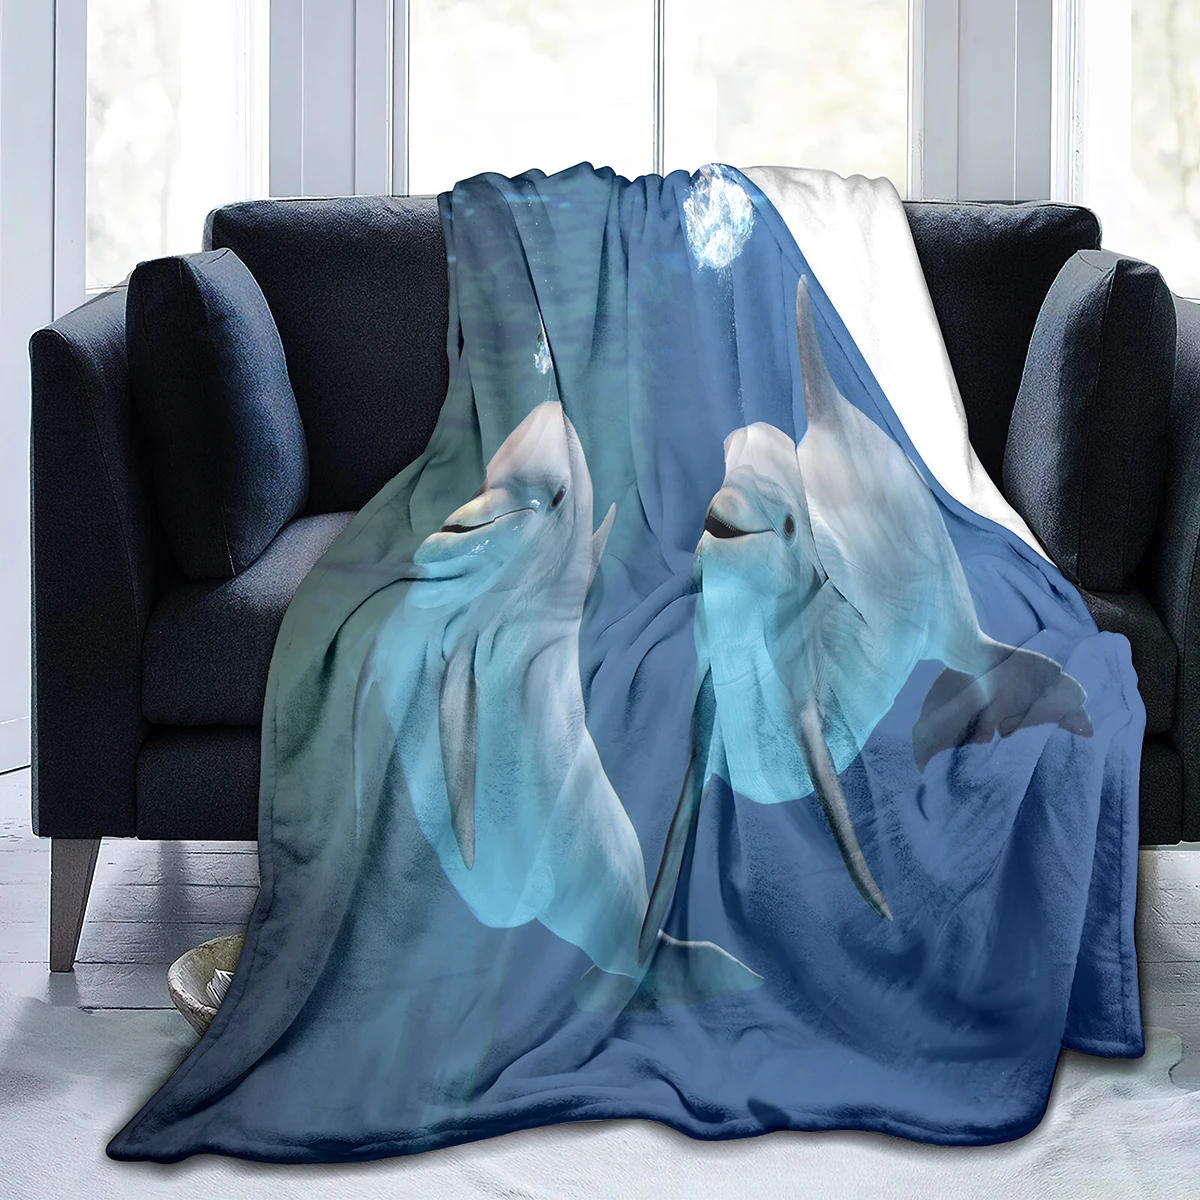 

Super Soft Warm Lightweight King Queen Size for Bed Couch Dolphin Flannel Throw Blanket Cute Kawaii Sea Animals Pattern Blanket